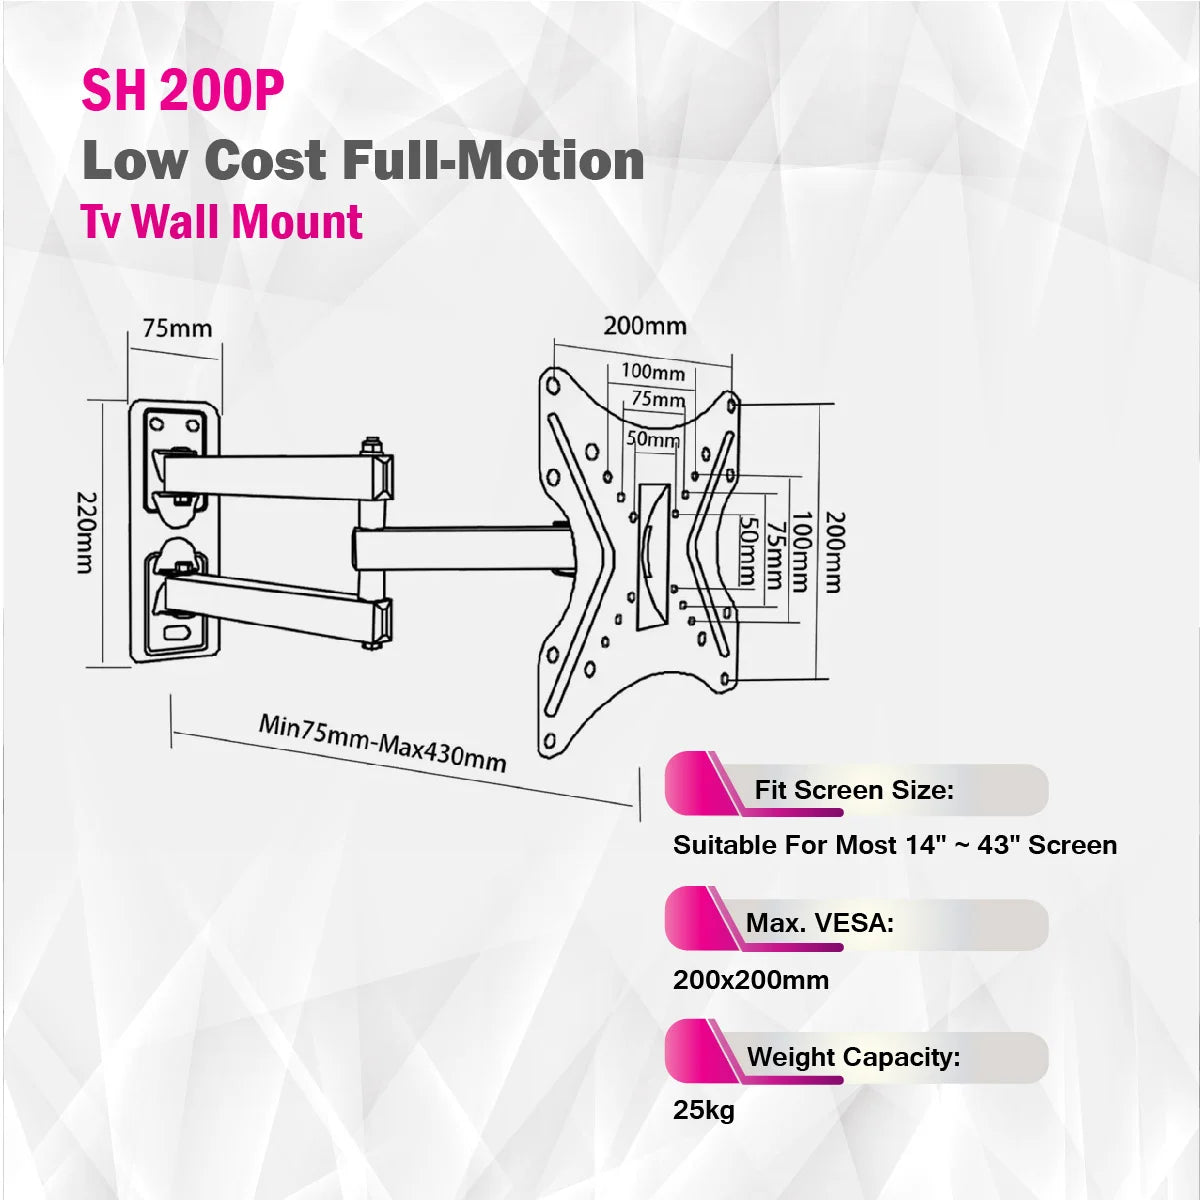 Skill Tech SH 200P - Low Cost Full-Motion Tv Wall Mount